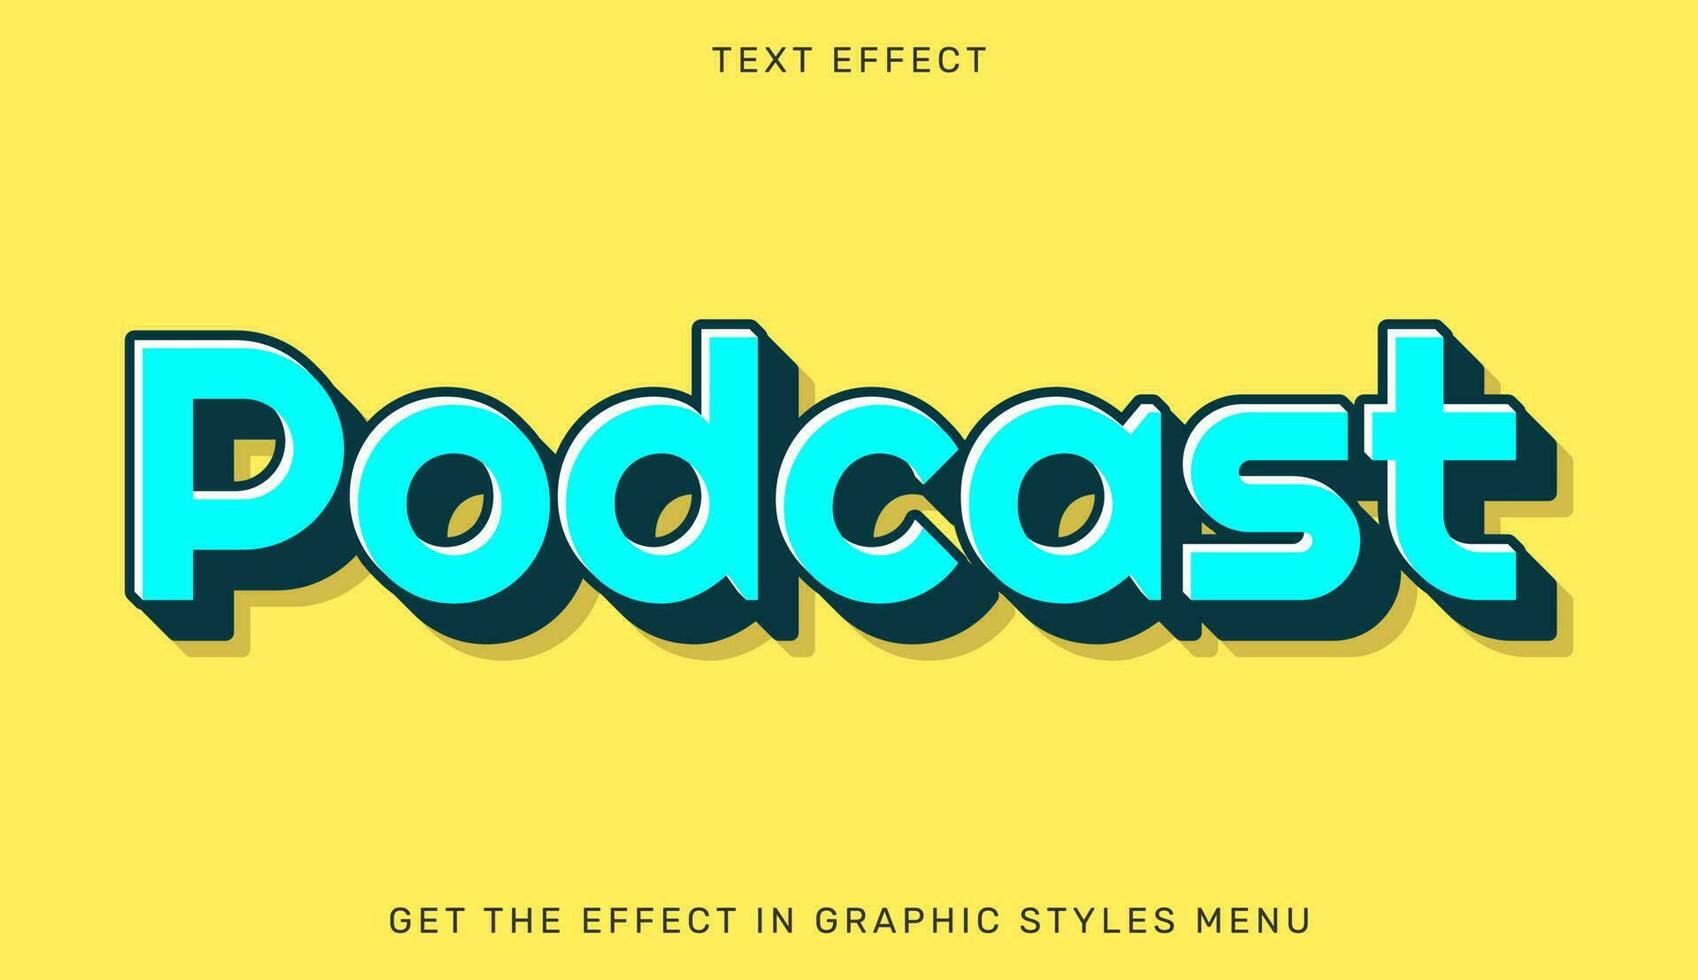 Vector illustration of podcast text effect